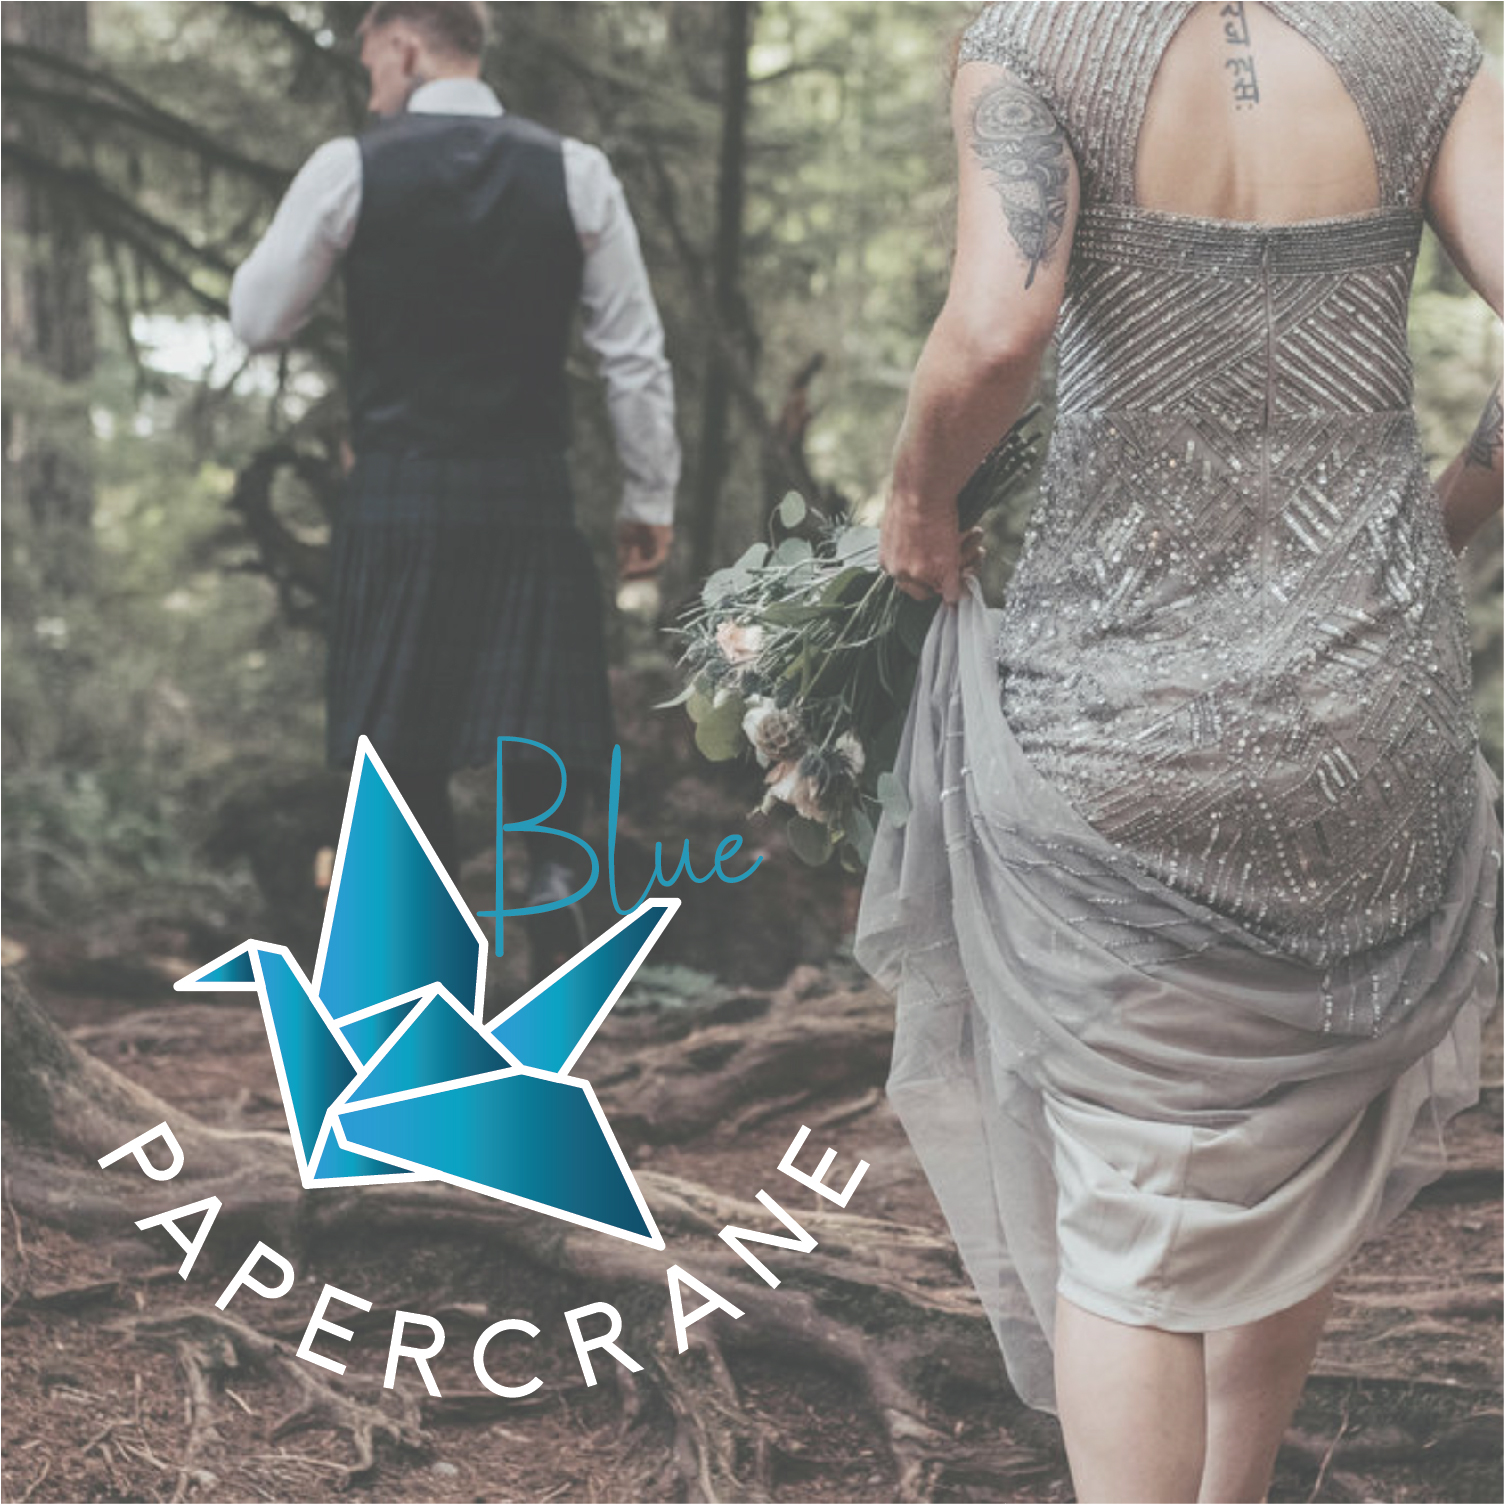 BLUE PAPERCRANE by bl3nd design graphic design agency in abbotsford british columbia canada